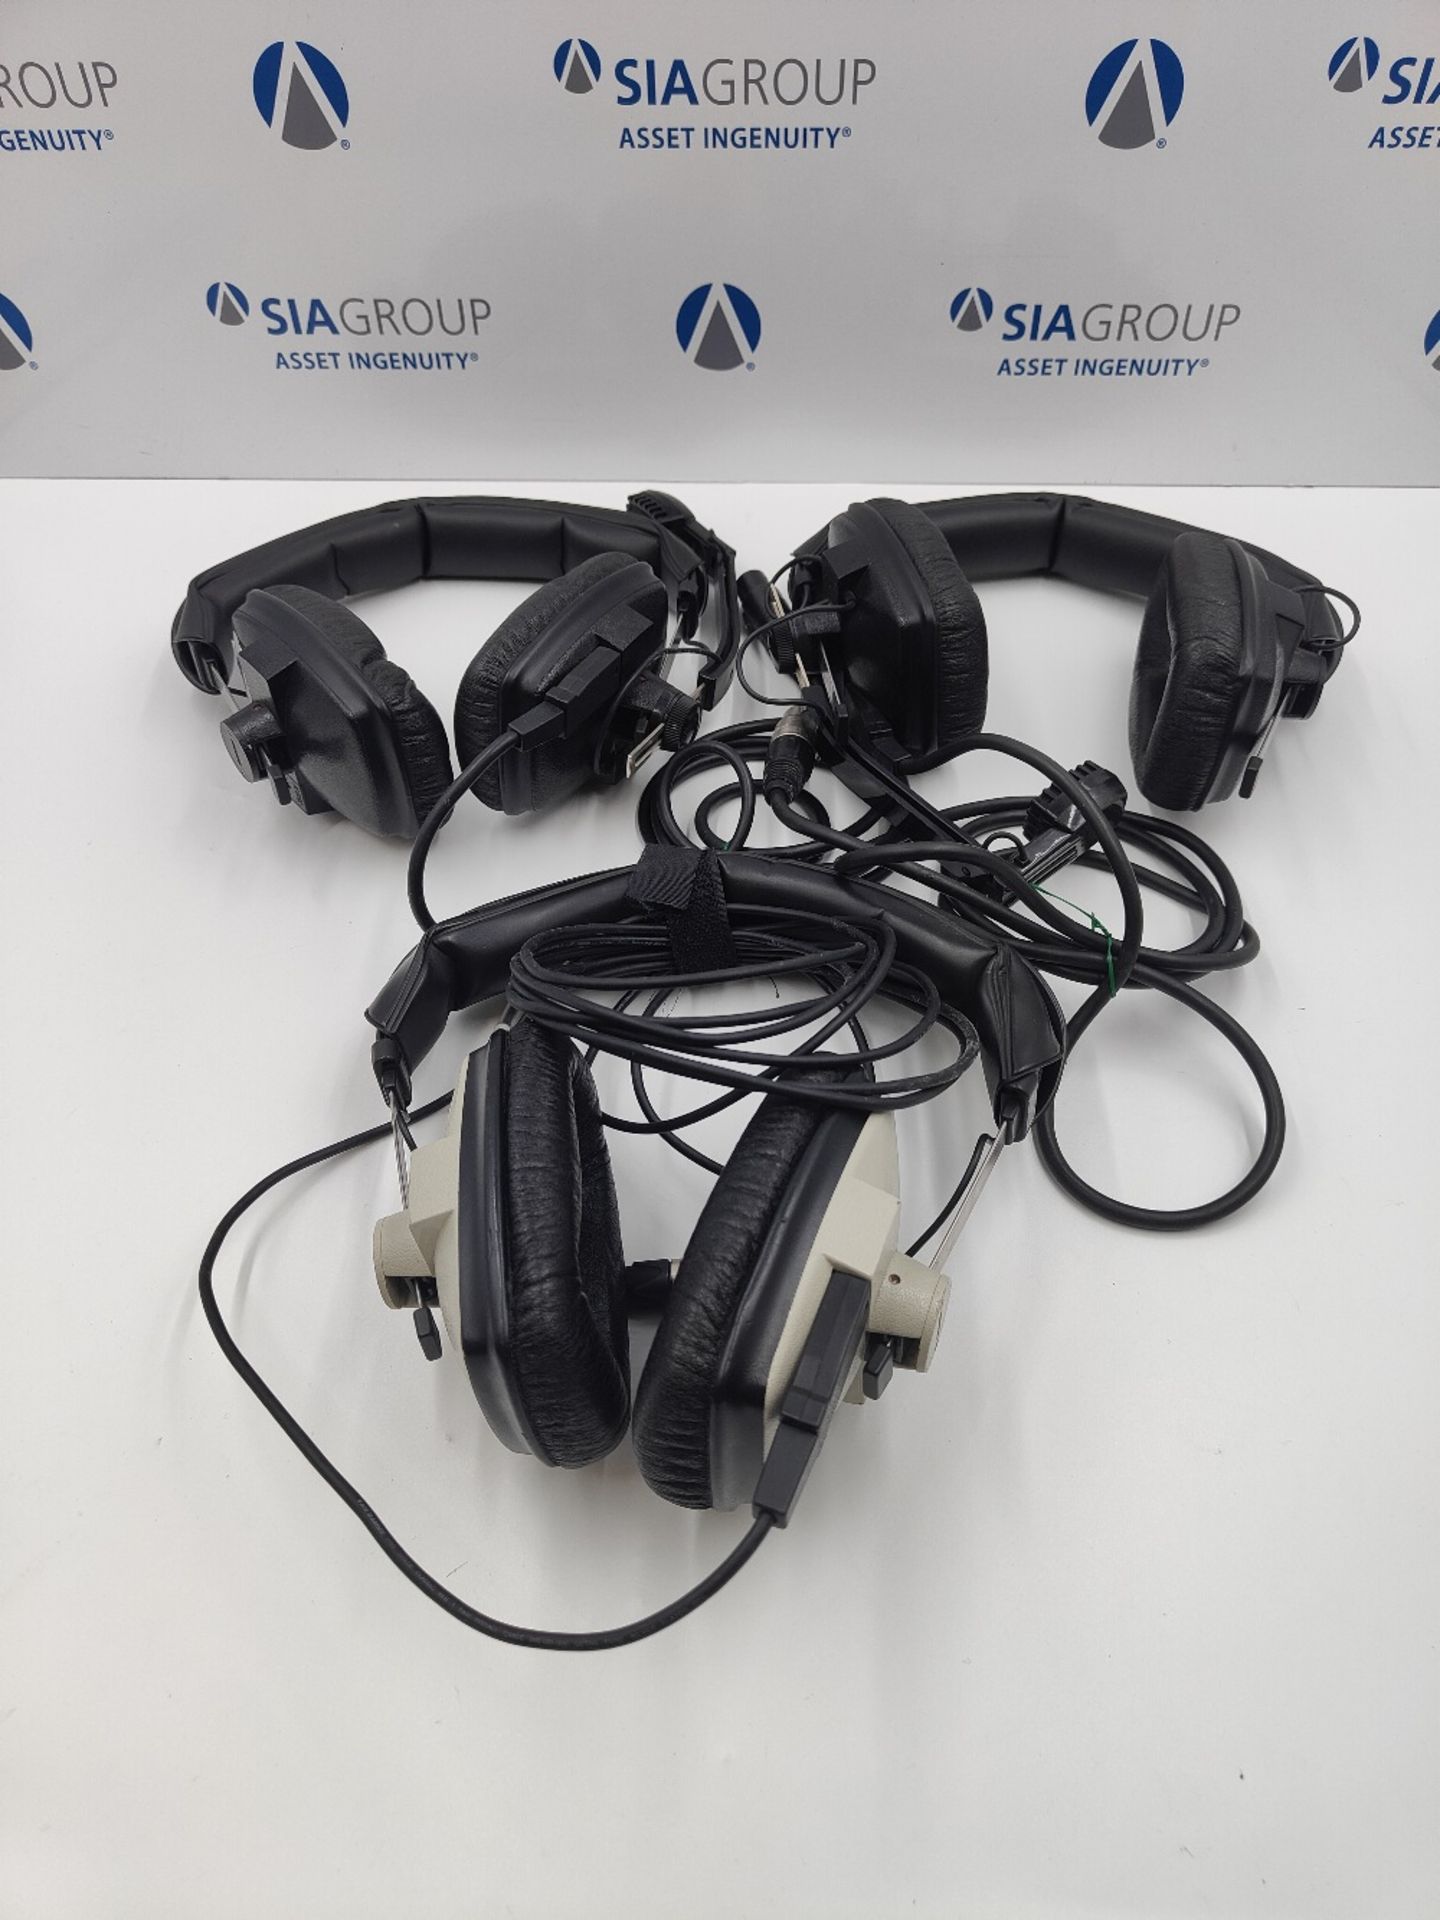 (2) Beyer Dynamic DT109 Comms Headsets & (1) Beyer Dynamic DT100 Comms Headset